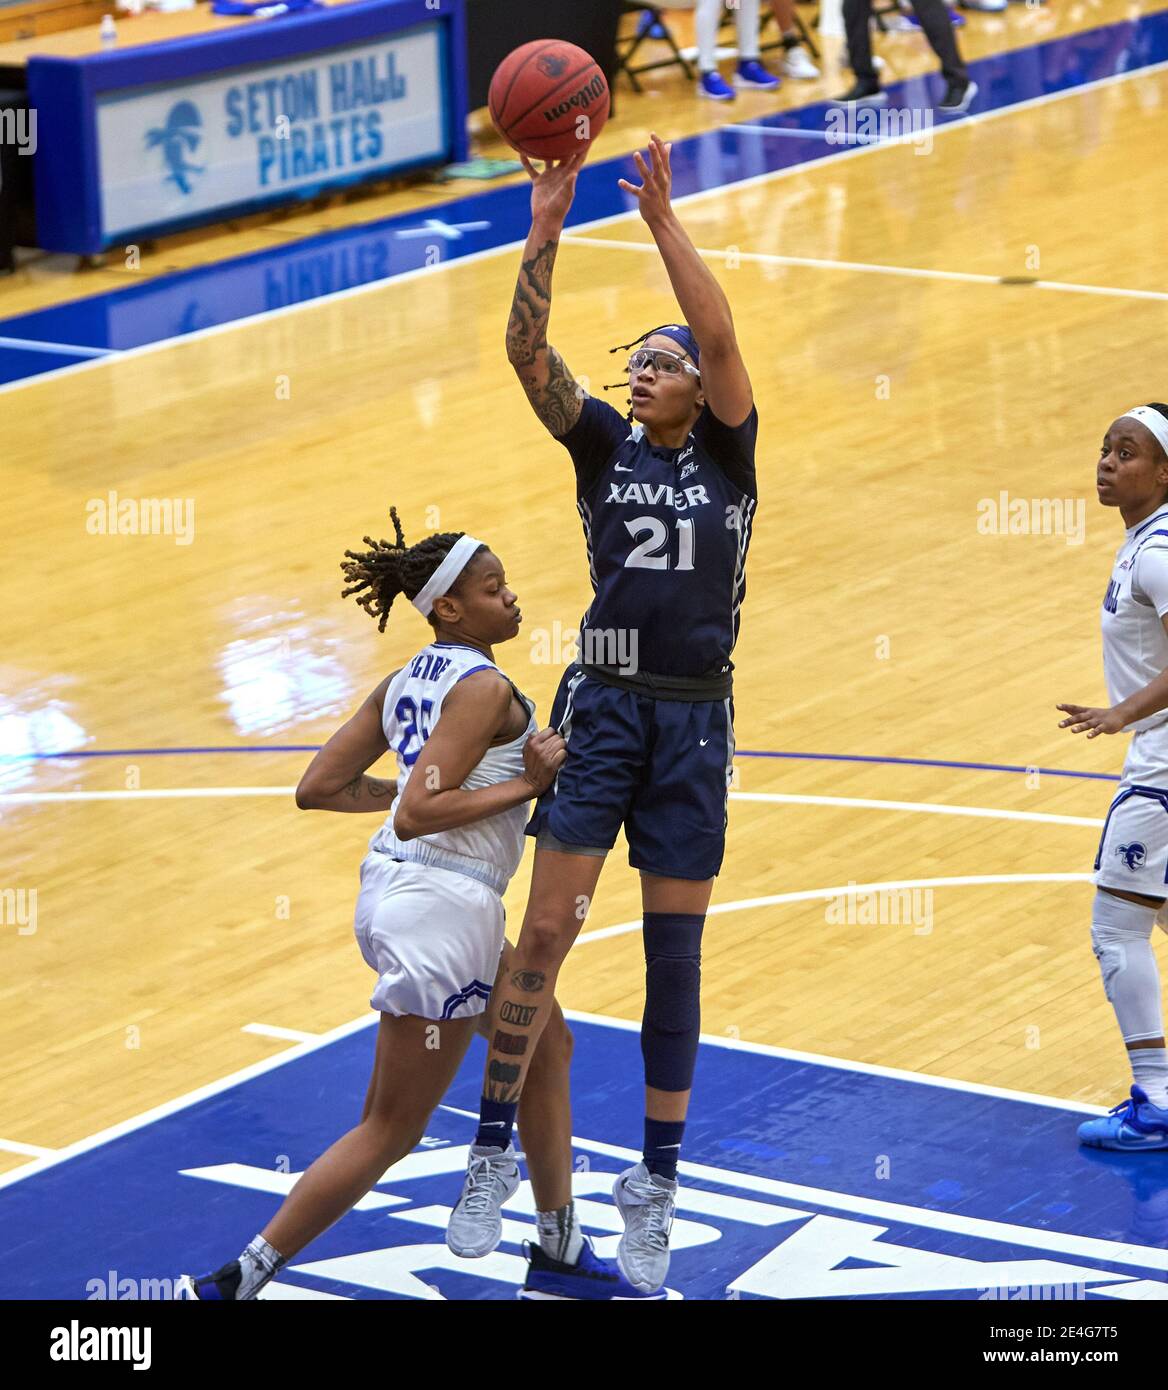 South Orange, New Jersey, USA. 23rd Jan, 2021. Xavier Musketeers forward A'Riana Gray (21) shoots over Seton Hall Pirates guard Desiree Elmore (25) in the second half at Walsh Gymnasium in South Orange, New Jersey. Seton Hall defeated Xavier 85-59. Duncan Williams/CSM/Alamy Live News Stock Photo